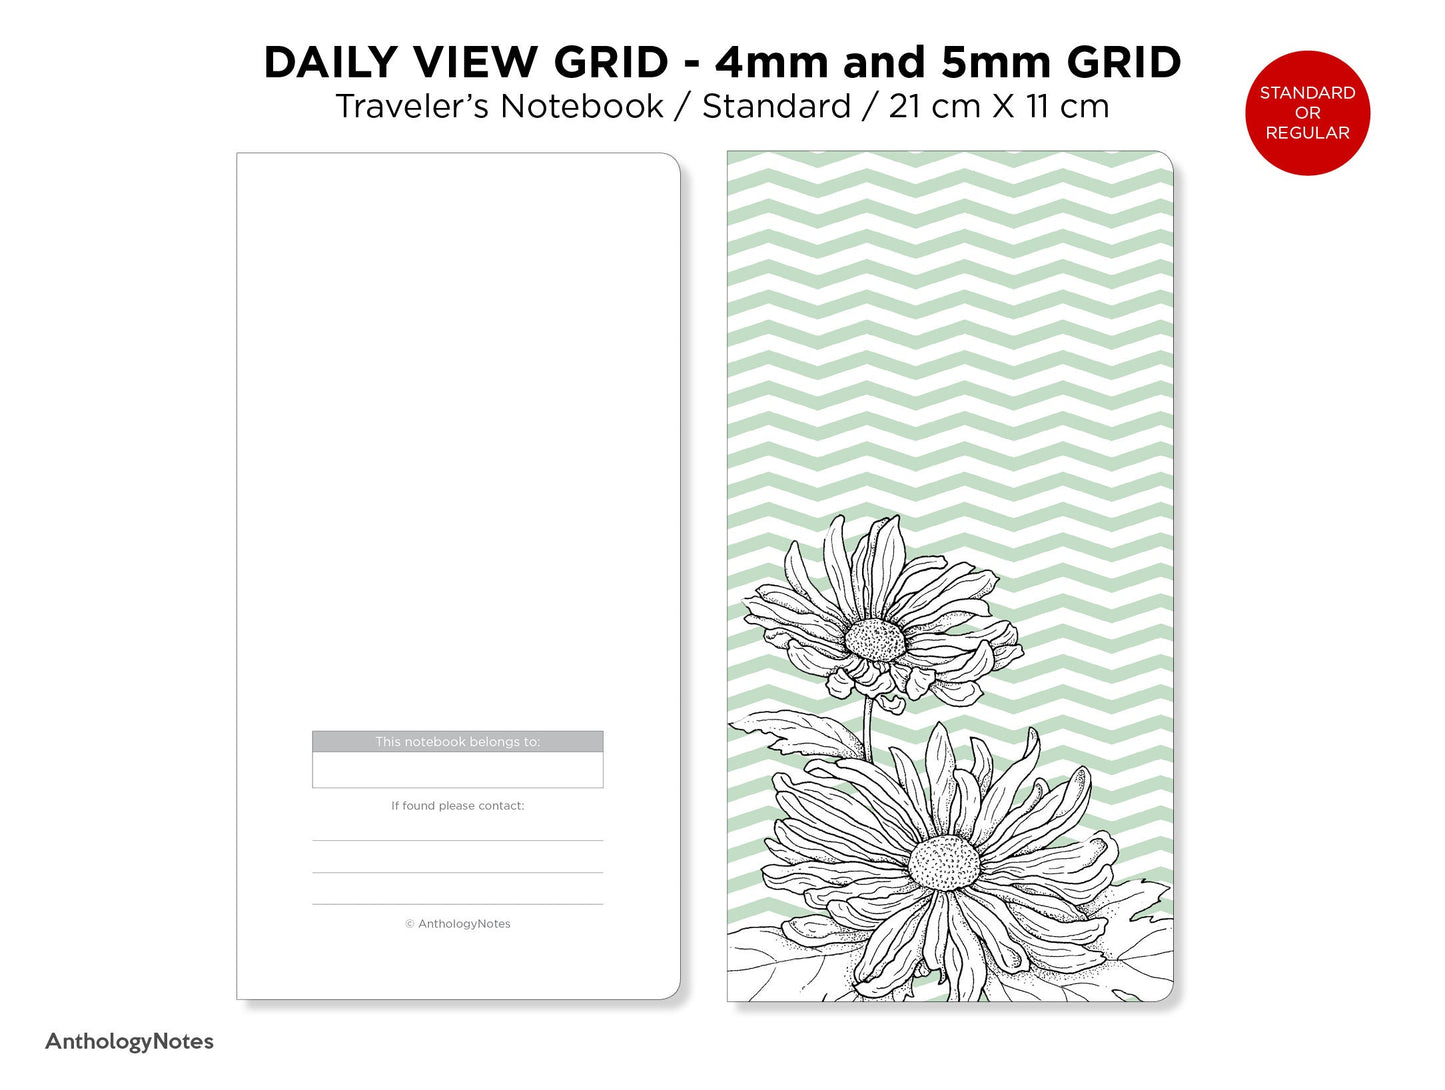 Daily View GRID Traveler's Notebook Printable Insert Standard Size Minimalist, 4 mm x 4 mm and 5 mm x 5 mm